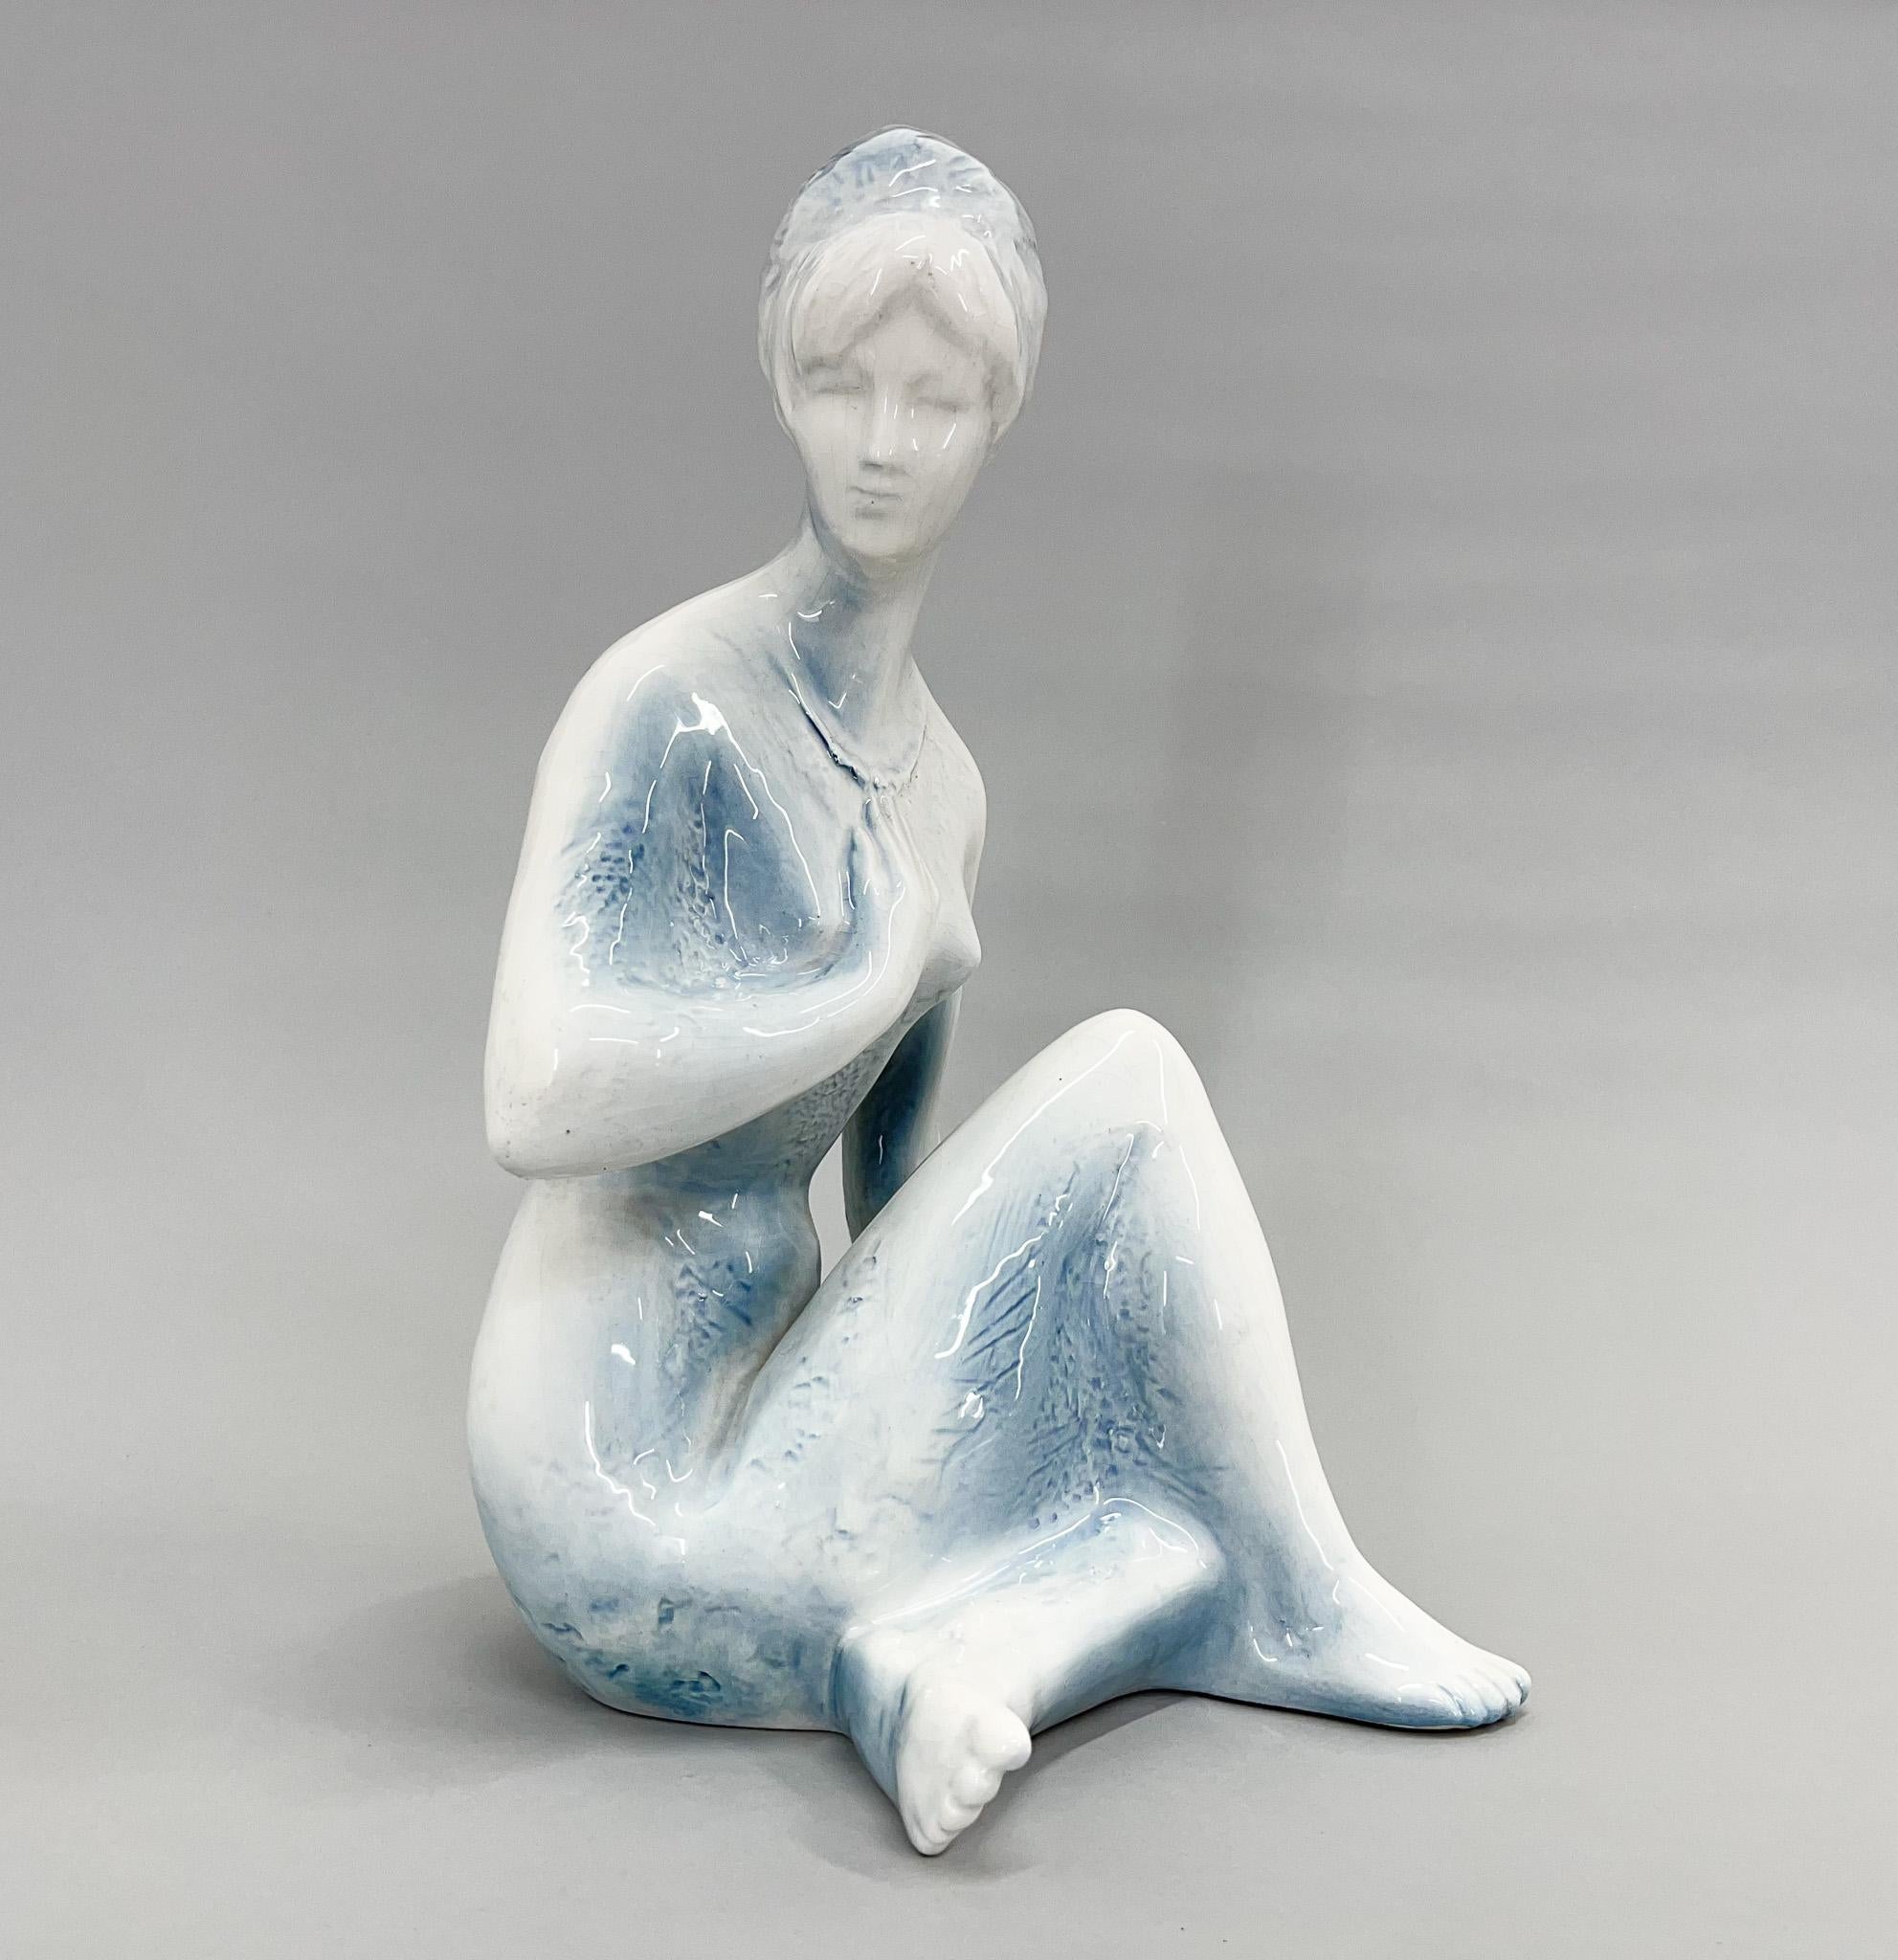 Beautiful glazed ceramic statue by Bohumil Kokrda in 1967 in Czechoslovakia. The statue of a sitting girl is signed by the author. The sculpture is in good vintage condition with original sticker of Jihokera Bechyne (the manufacturer).